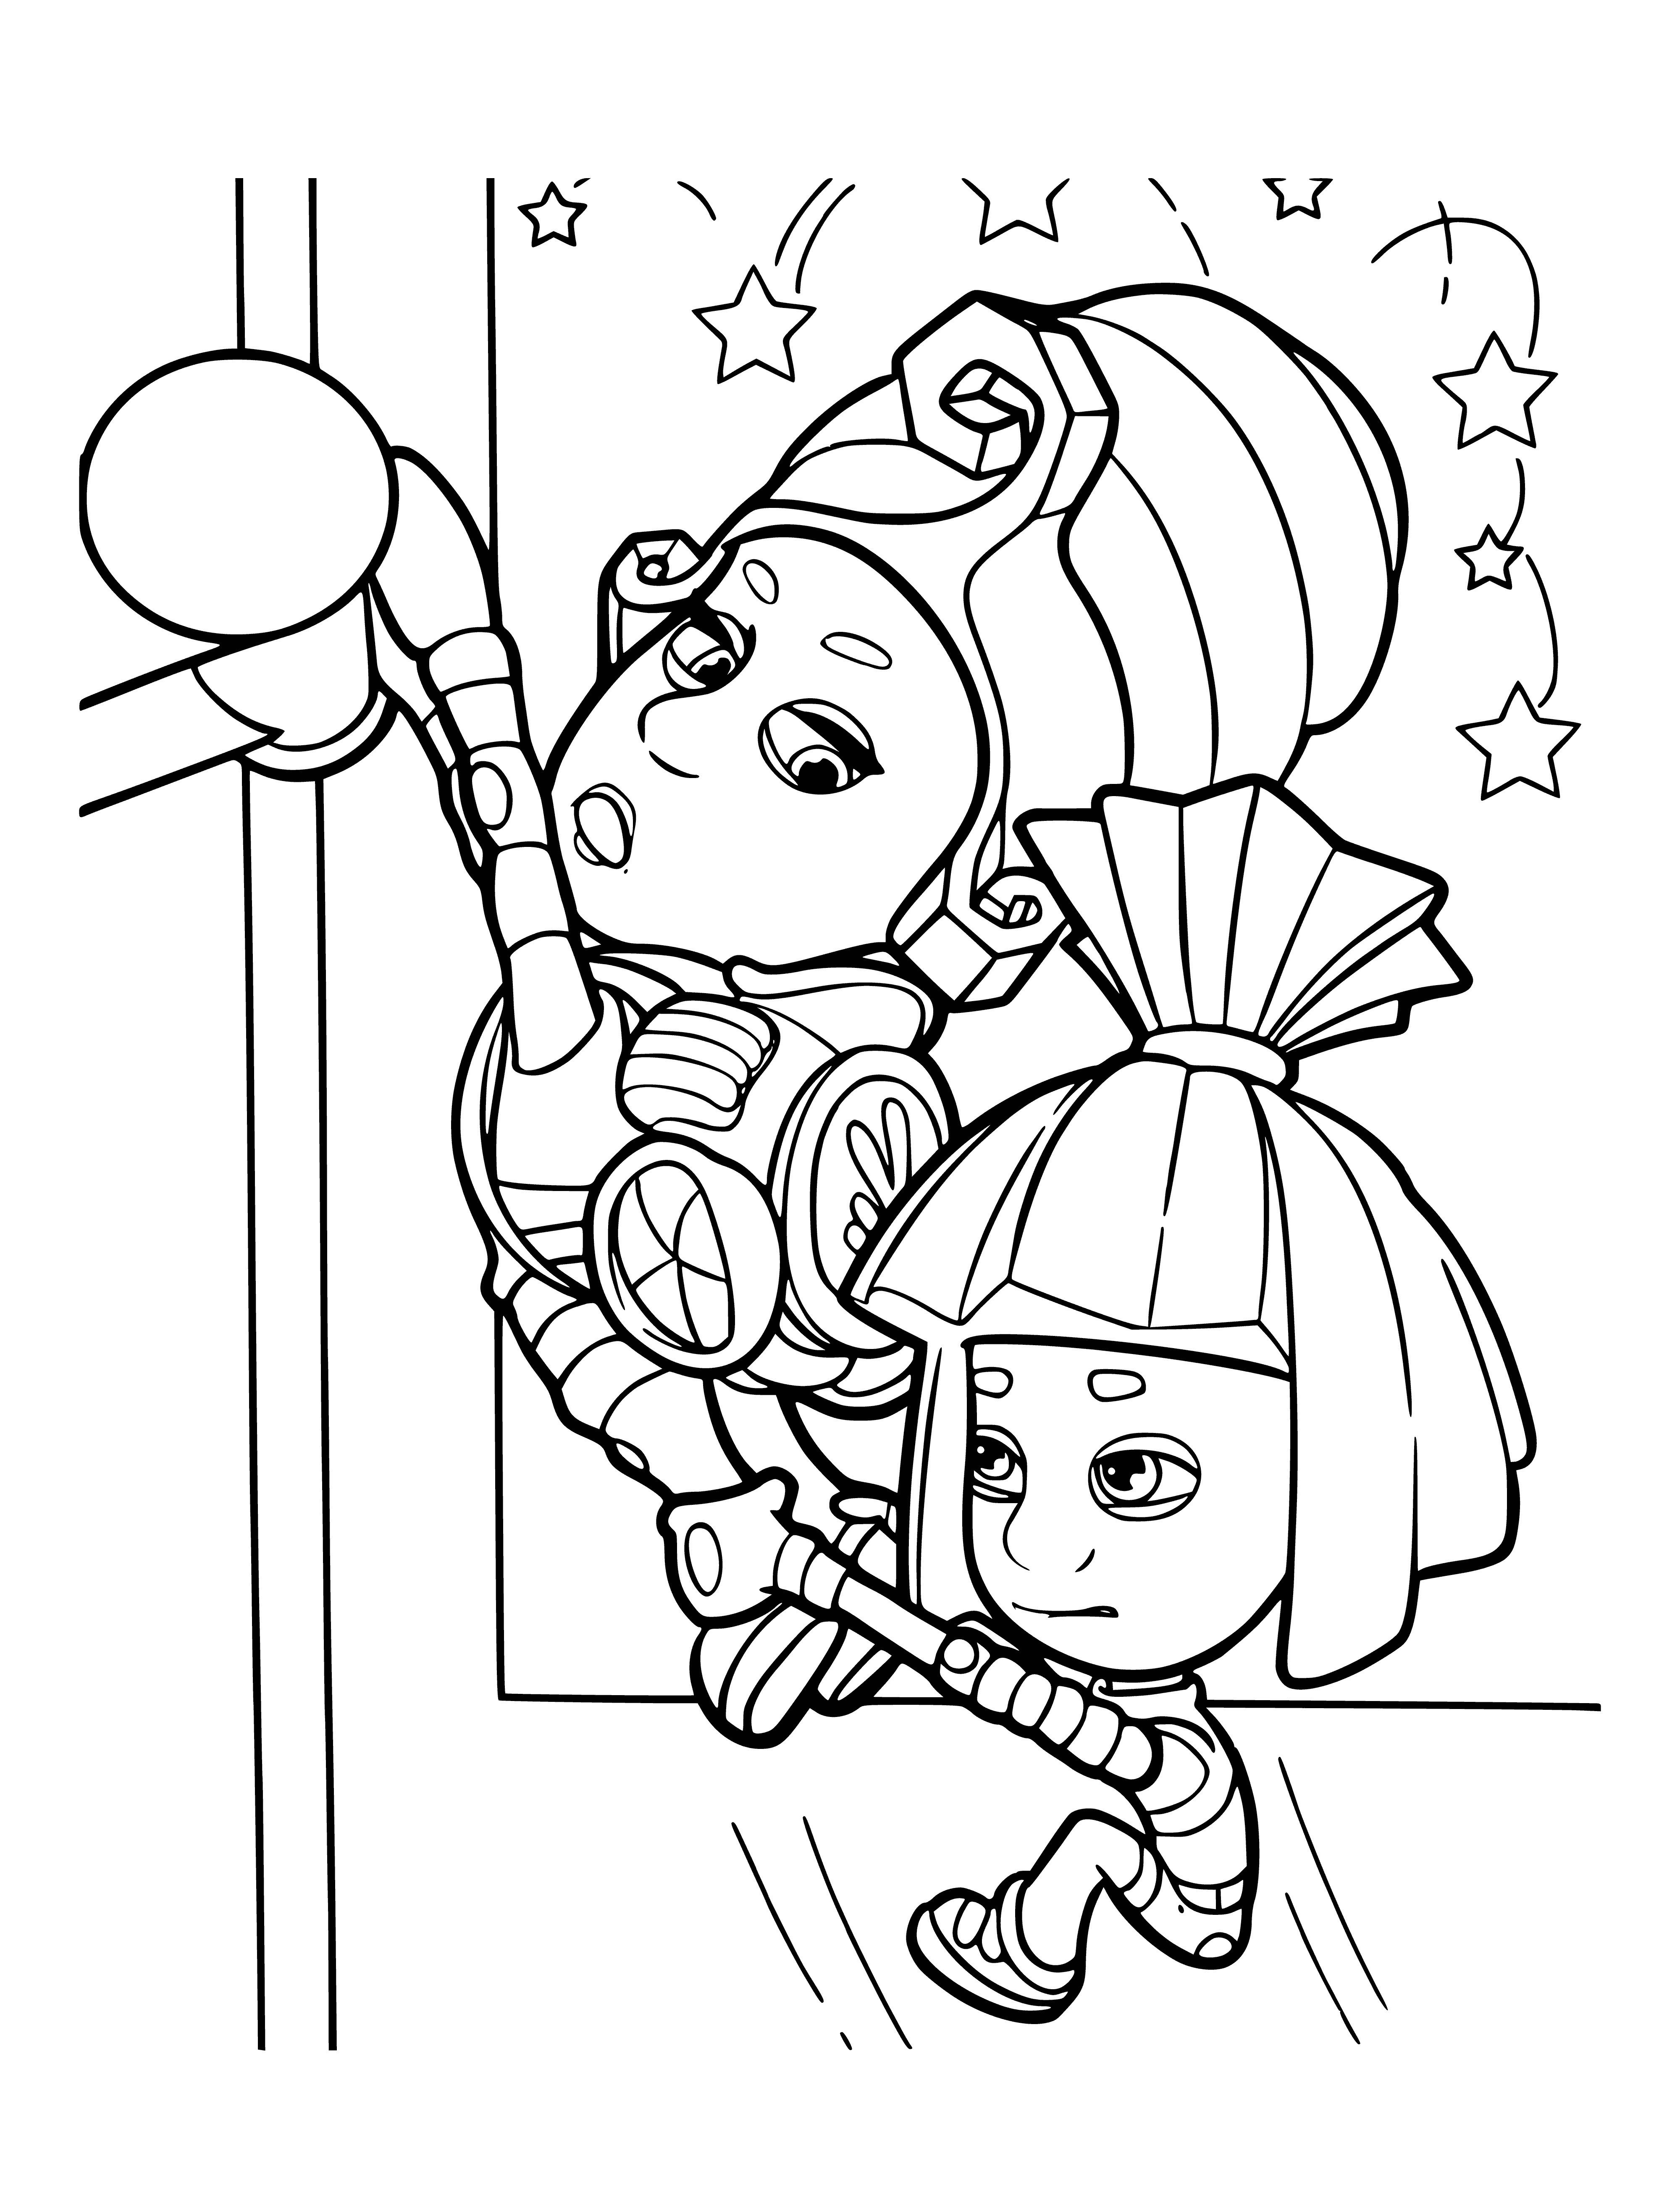 coloring page: Adorable 'Simka & Masya' creatures have long limbs, big heads, small bodies, and wear overalls, hats, w/tools in hands.